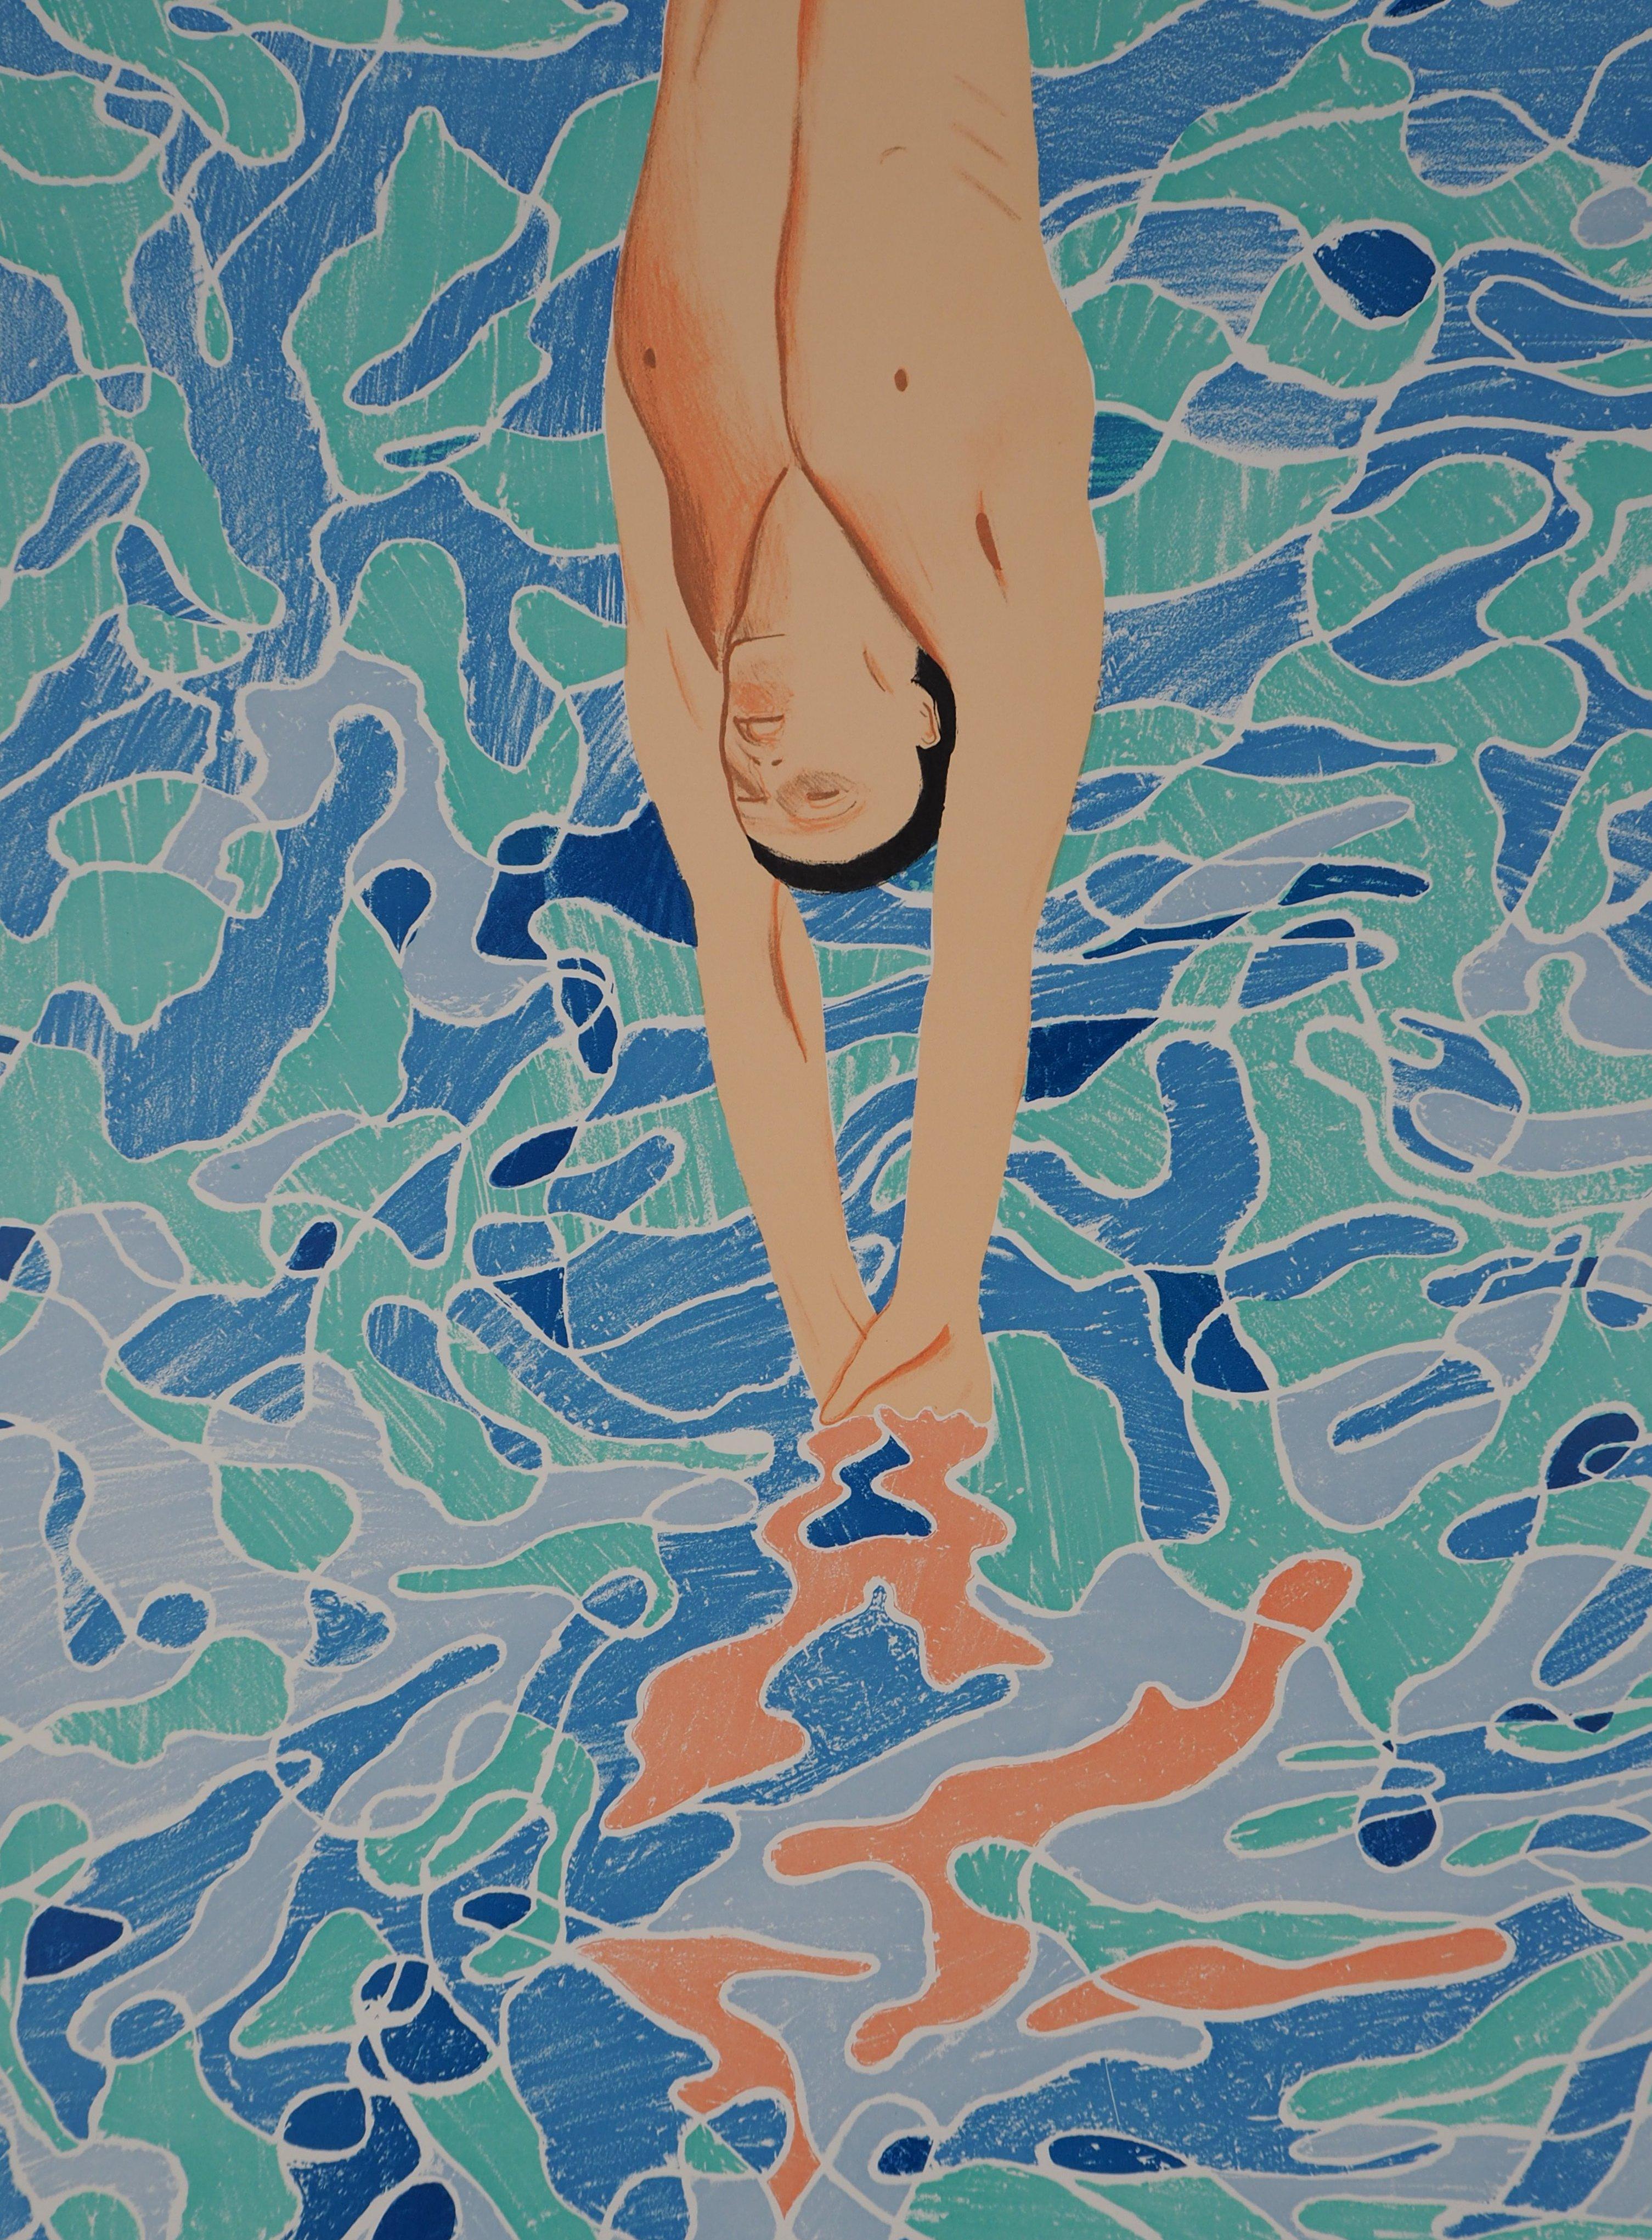 David HOCKNEY
Pool Diver

Original lithograph
Signature printed in the plate
On paper 101 x 64 cm (c. 40 x 26 inch)
Made for the Olympic Games in Munich, 1972

Excellent condition